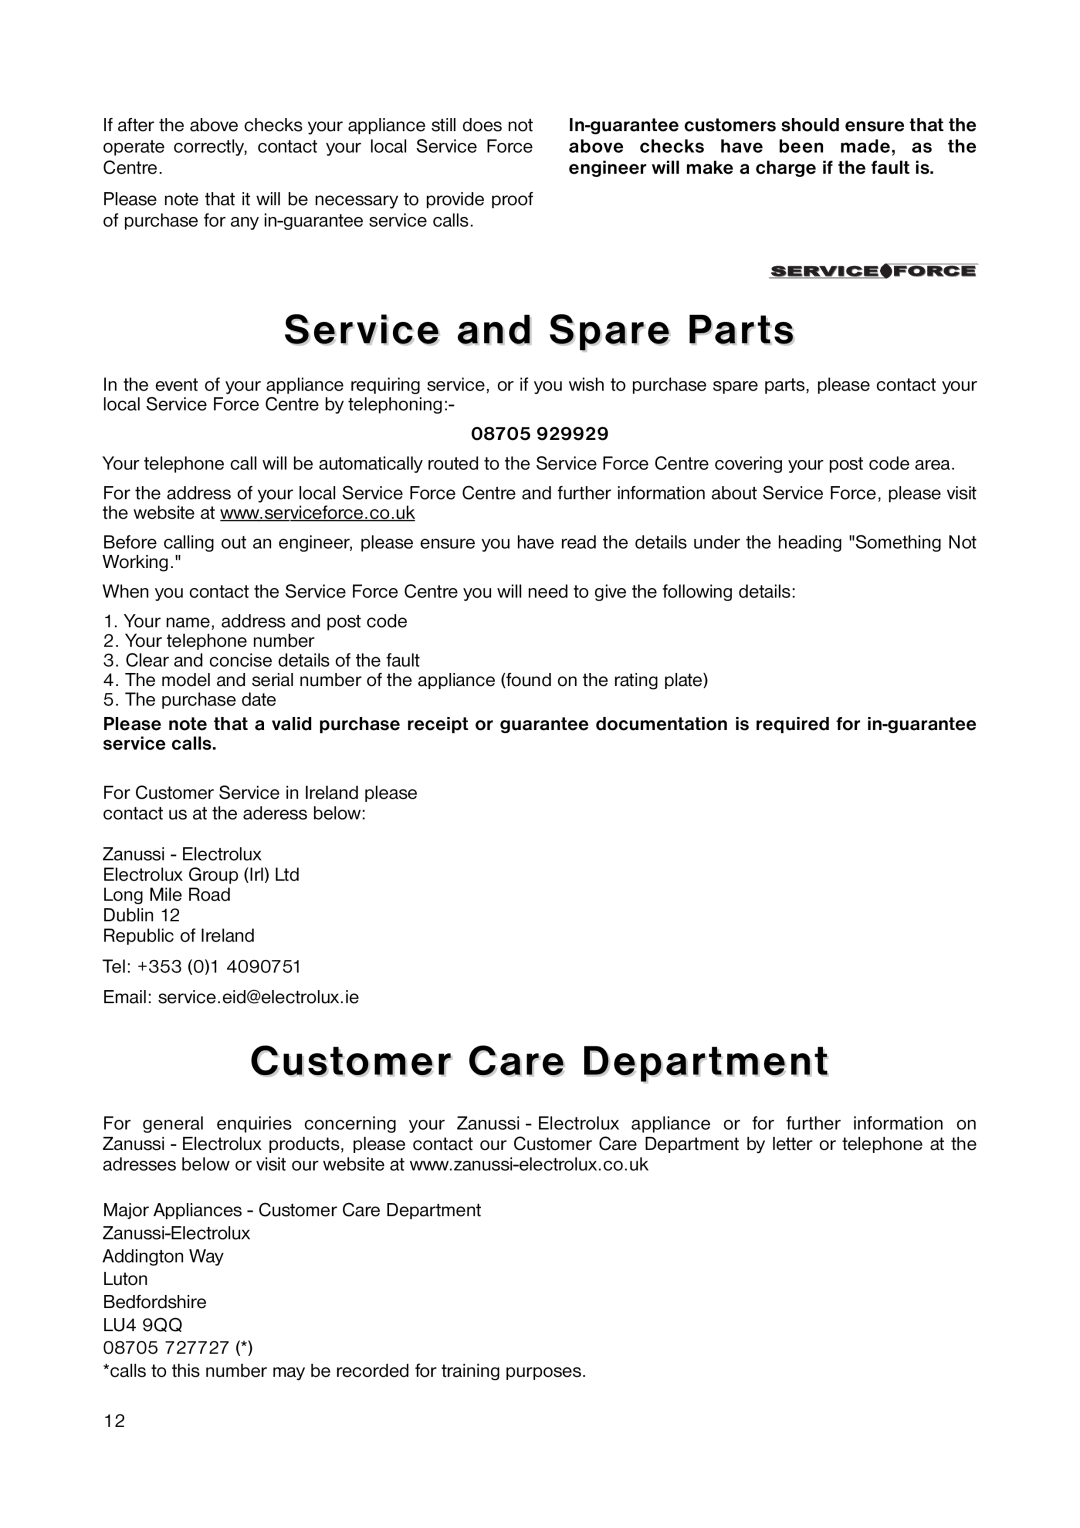 Zanussi ZERB 8441 manual Service and Spare Parts, Customer Care Department 